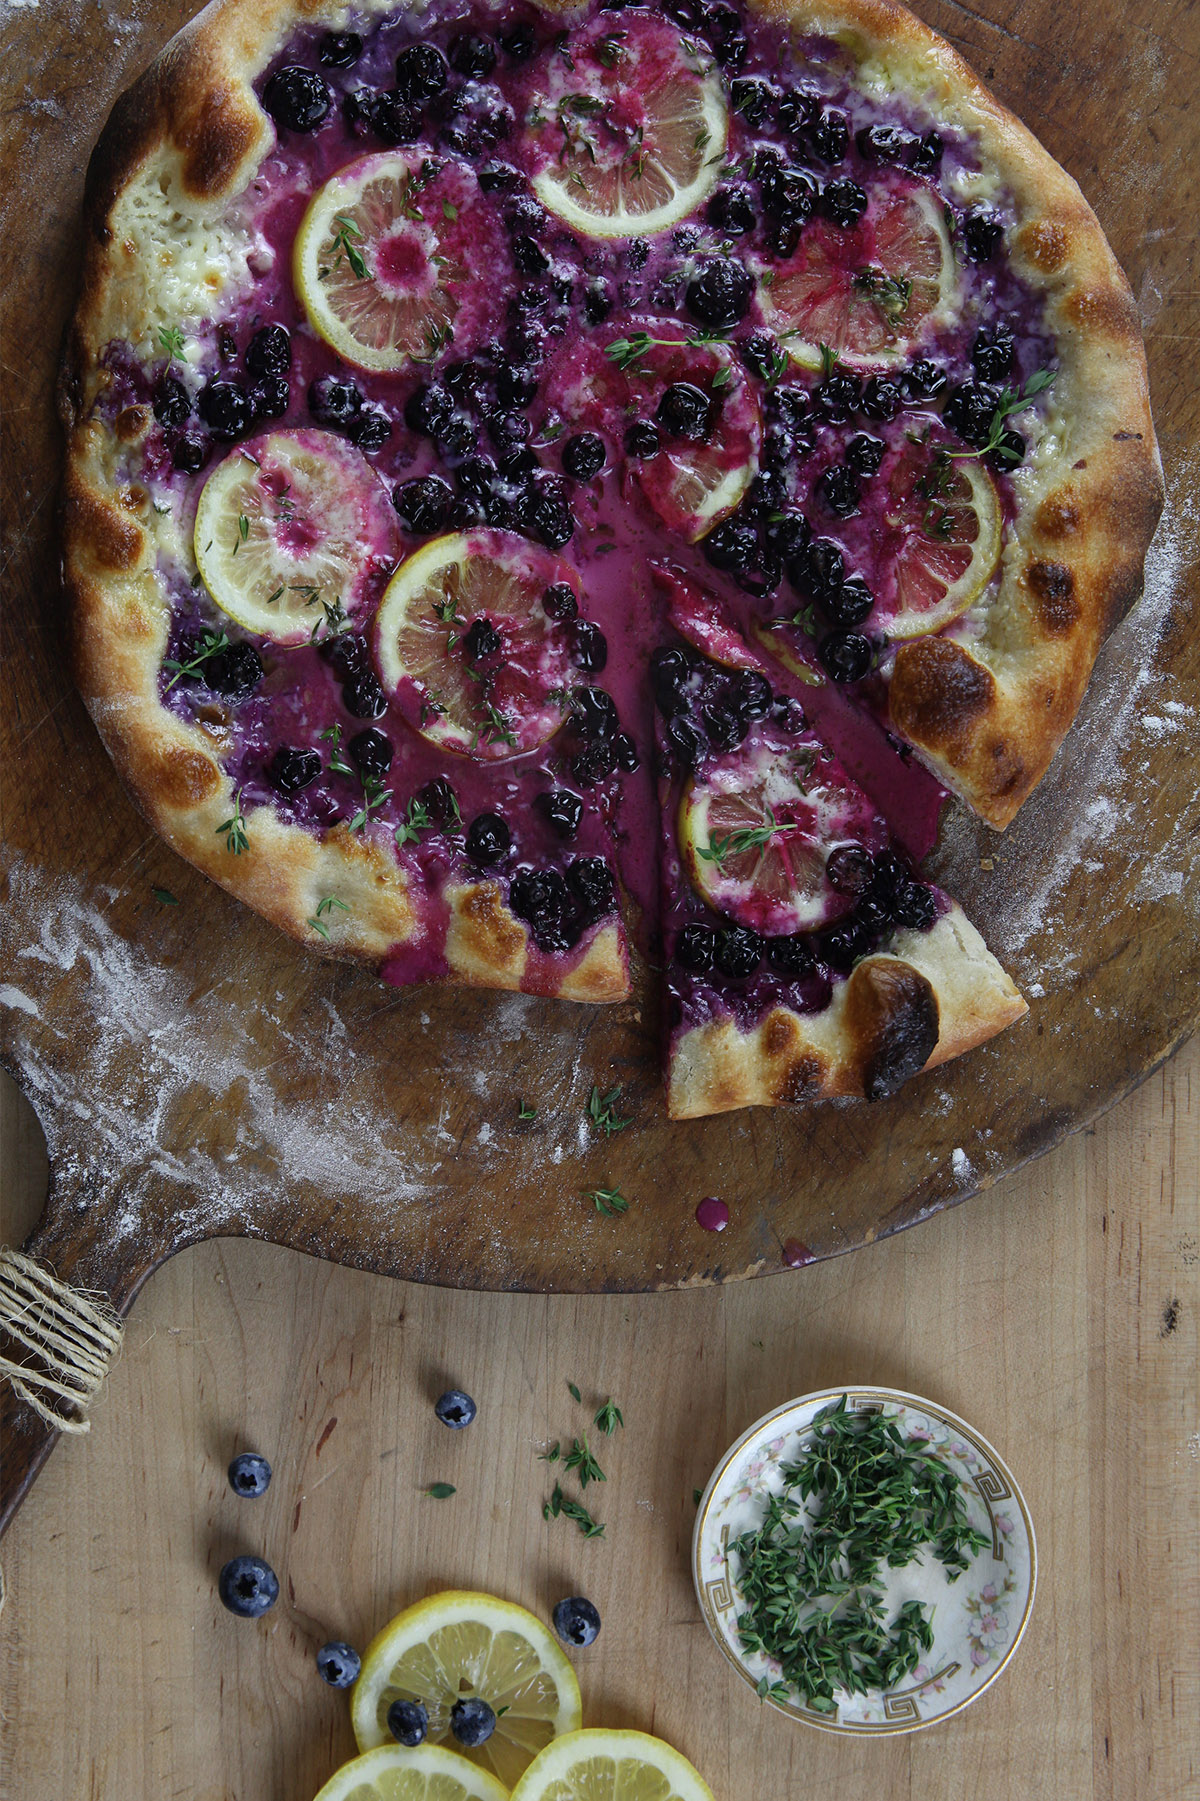 Blueberry and Lemon Pizza